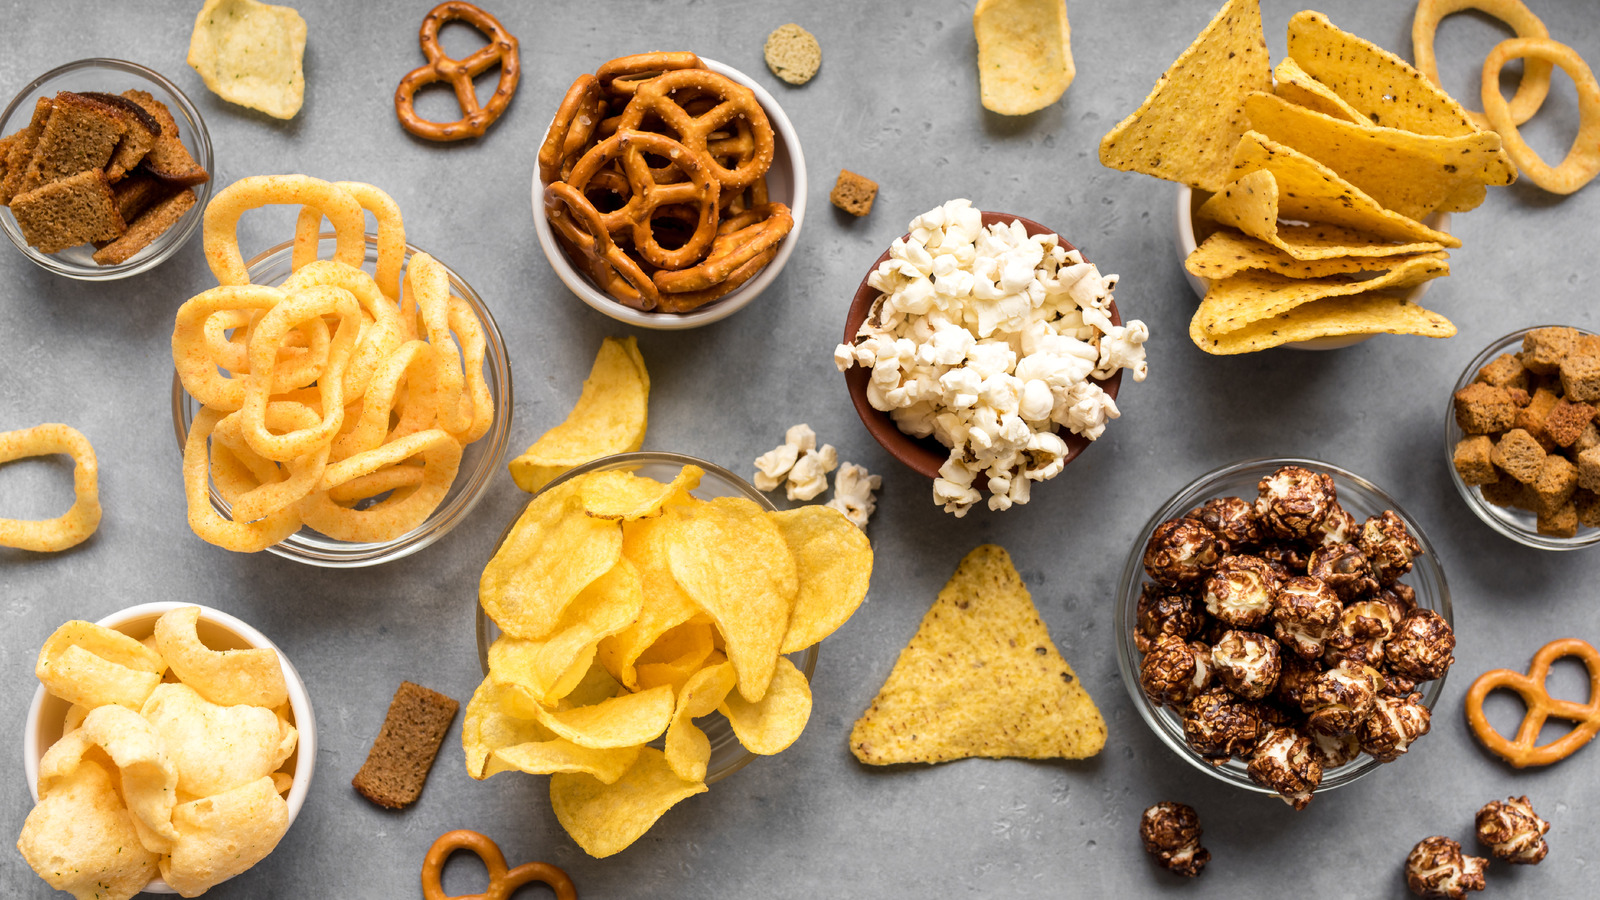 Why We Love Crunchy Foods According To Science